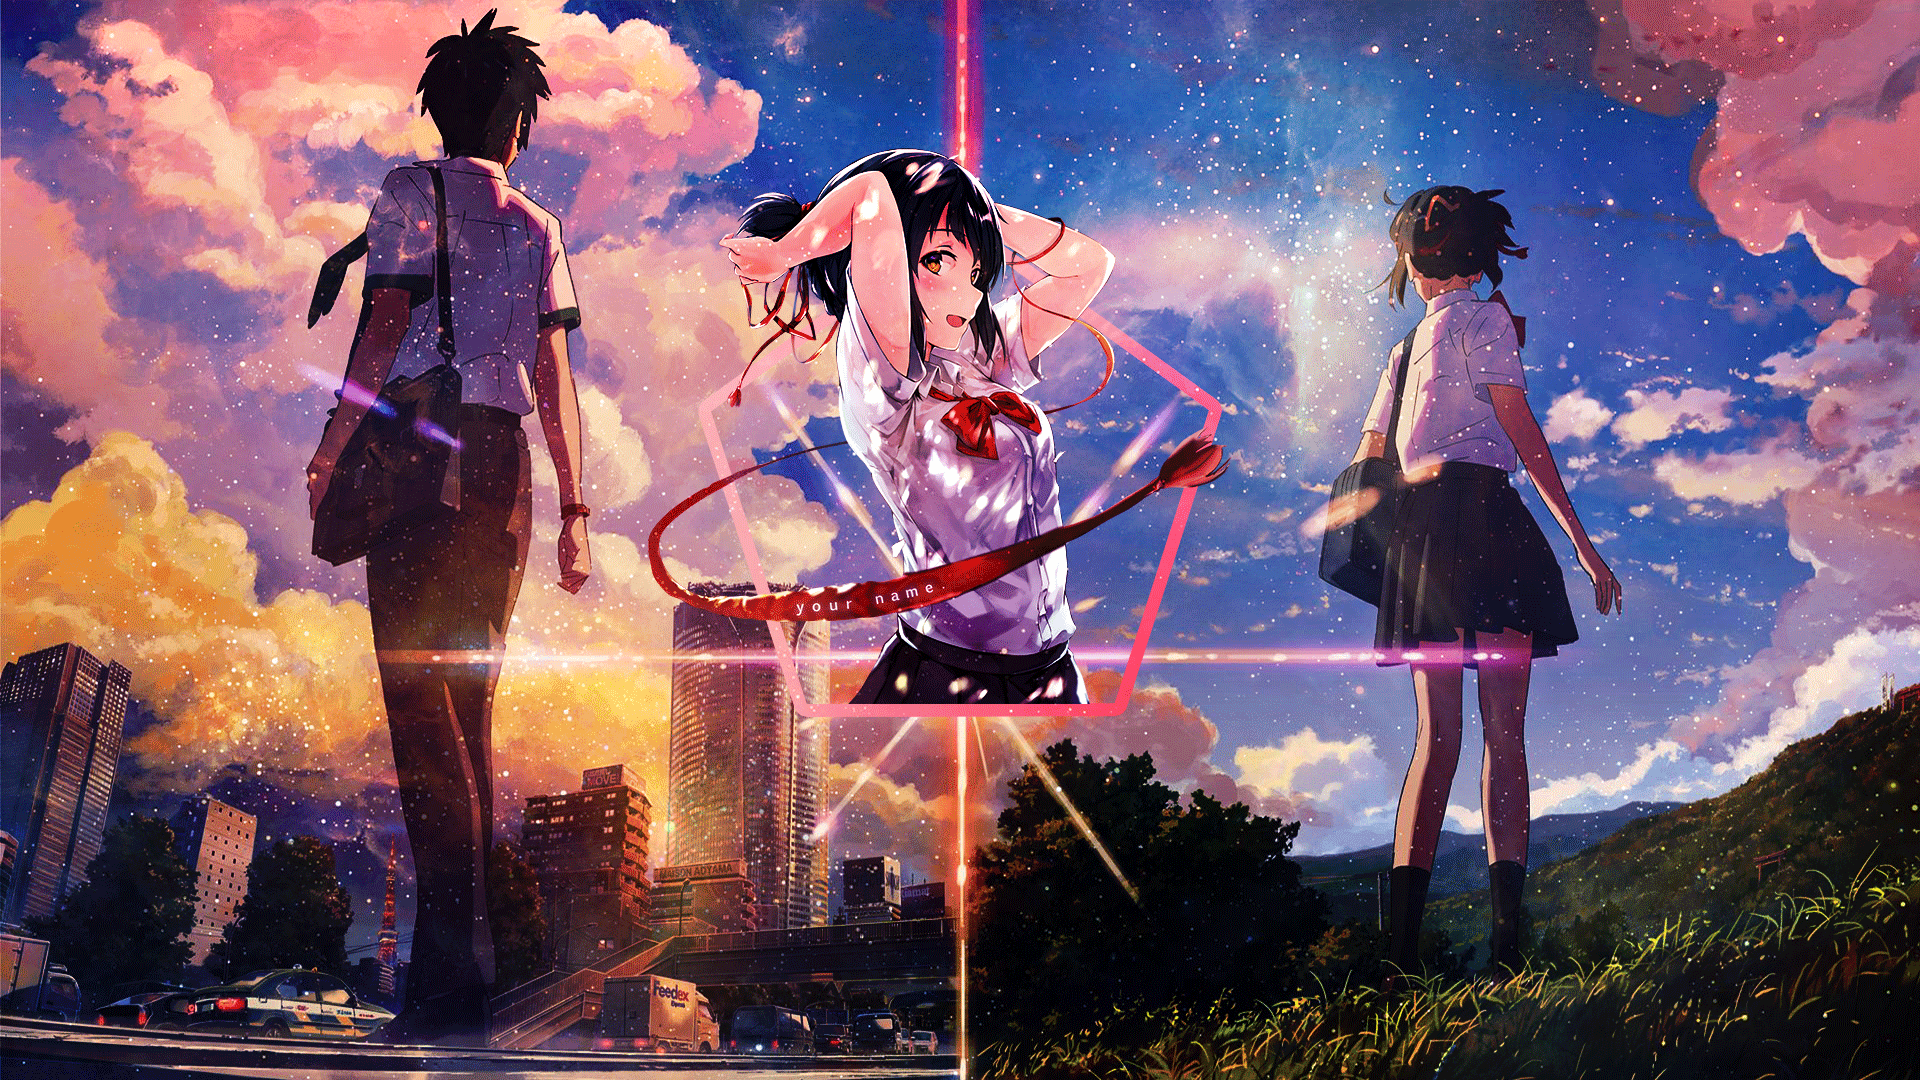 Anime 1920x1080 Kimi no Na Wa anime anime girls colorful sky outdoors arms up clouds city picture-in-picture looking at viewer brightness open mouth dark hair red bow Spiky Hair black pants white t-shirt anime boys